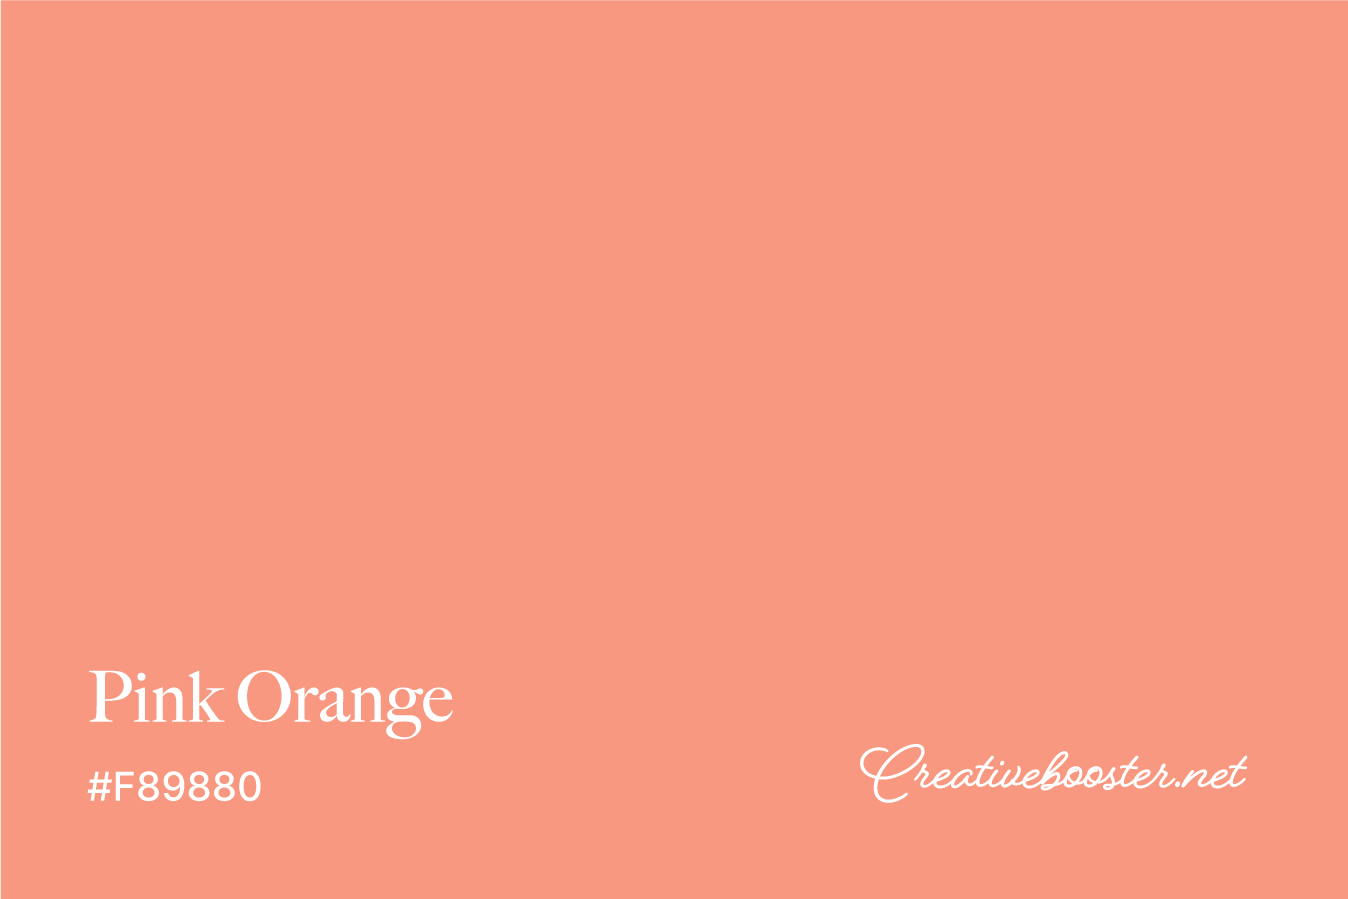 pink-orange-color-with-name-and-hex-code-#F89880